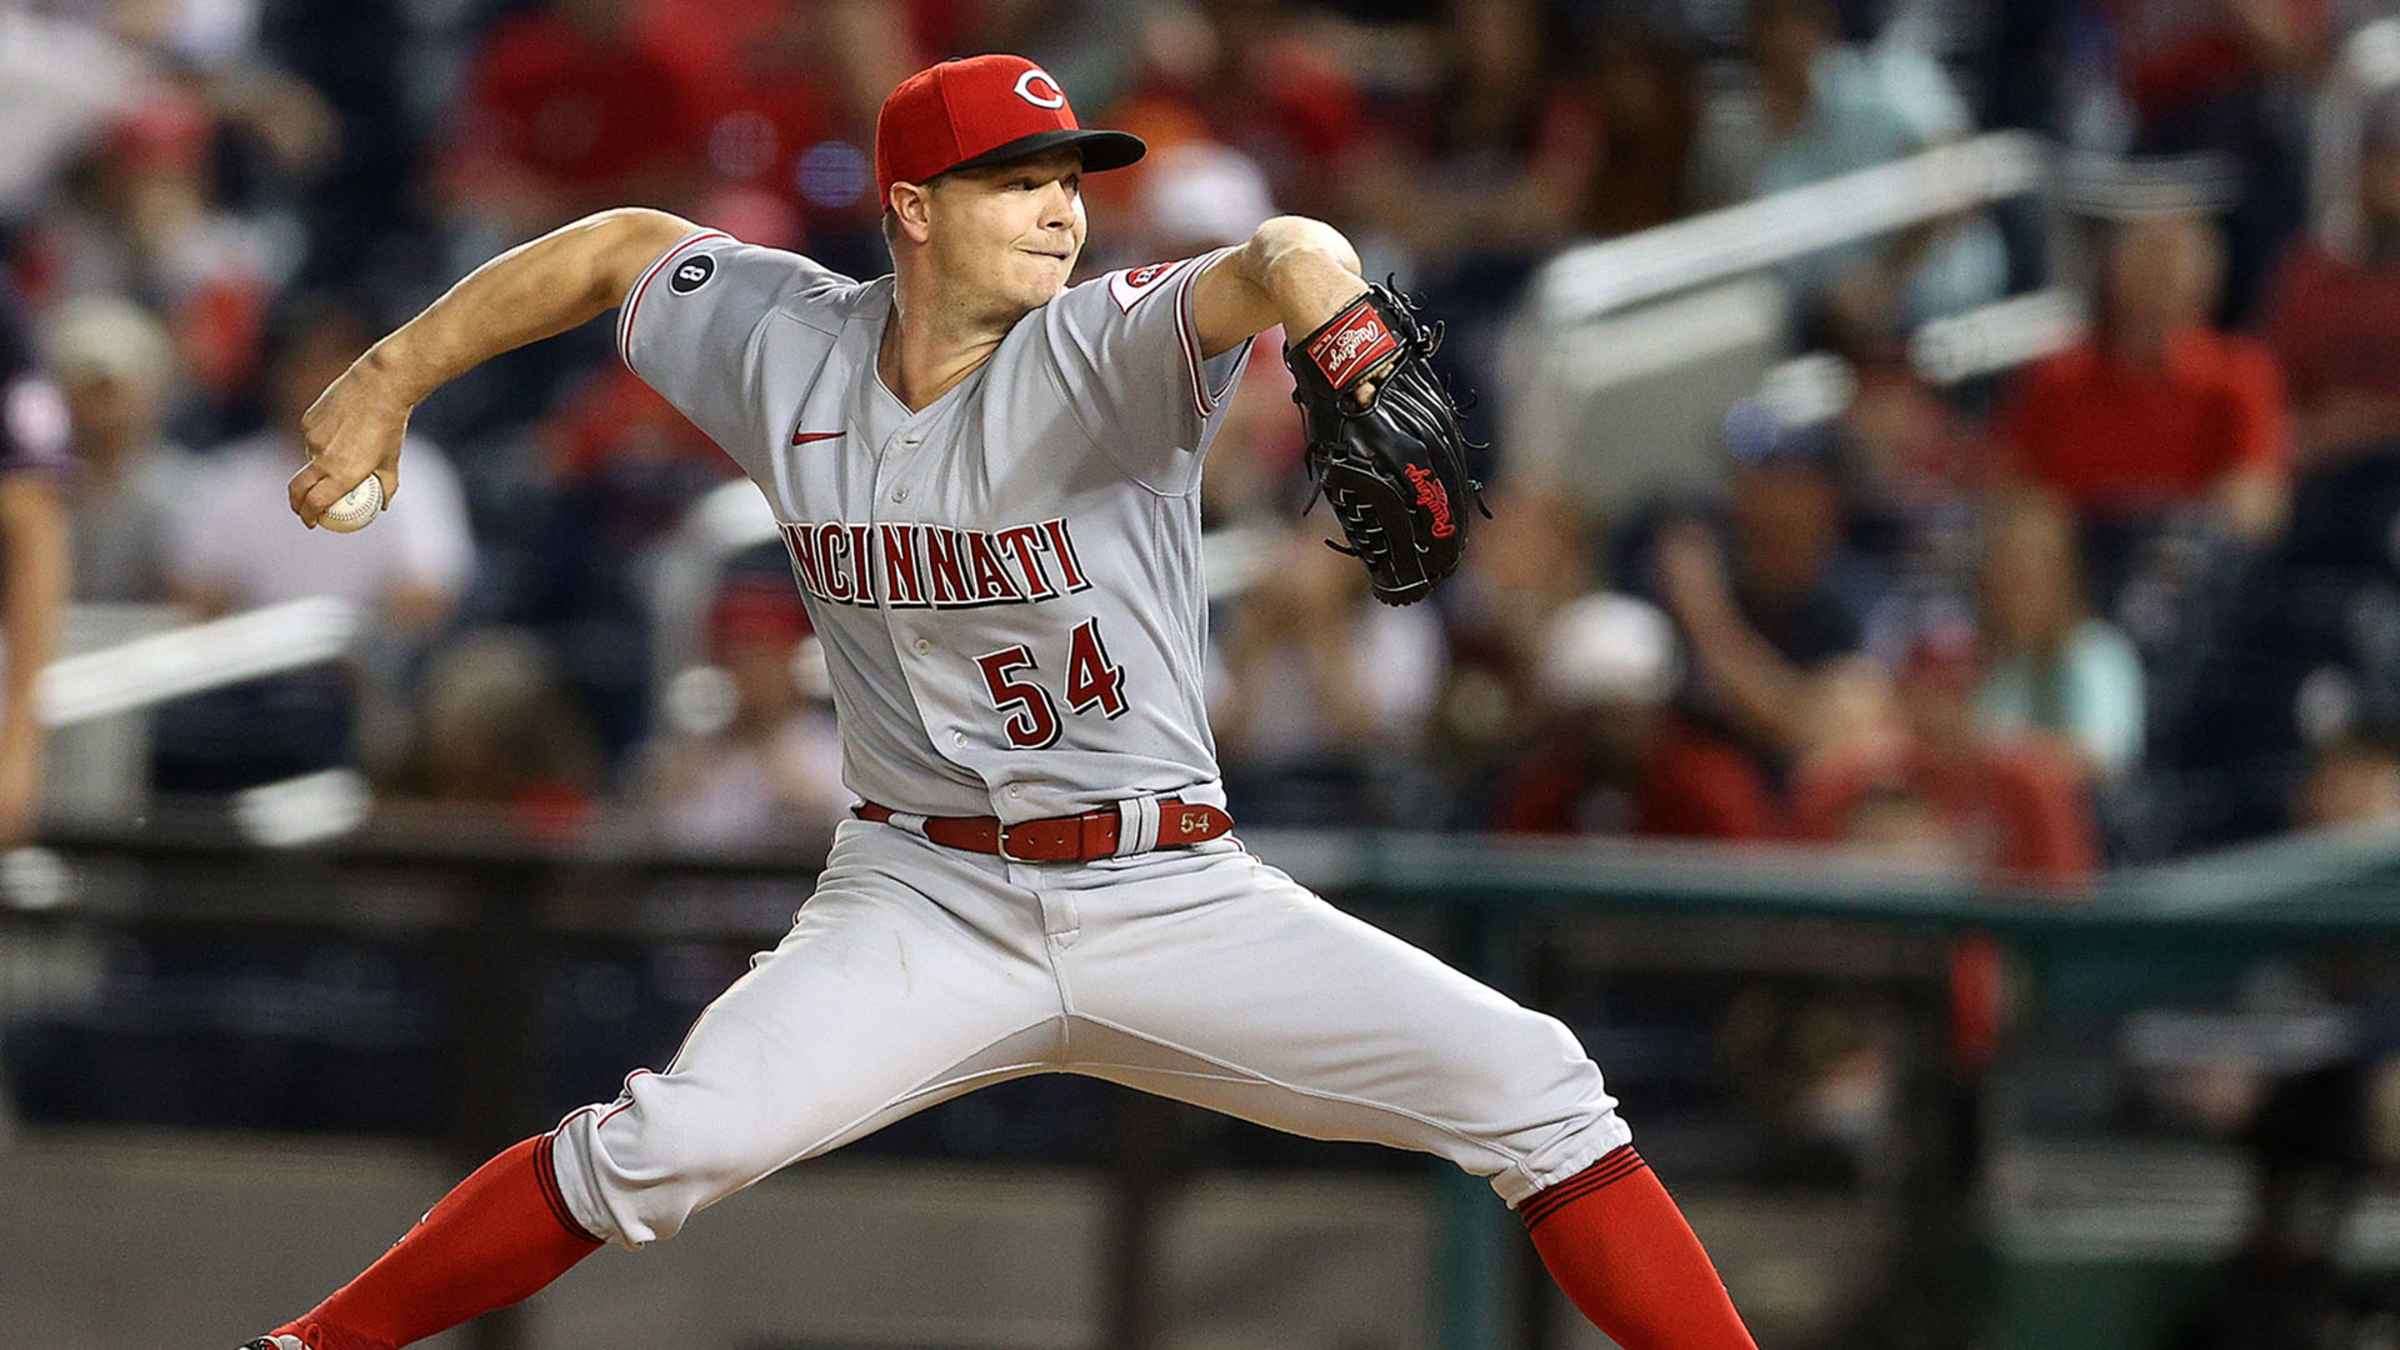 Sonny Gray earns win, Reds beat Royals